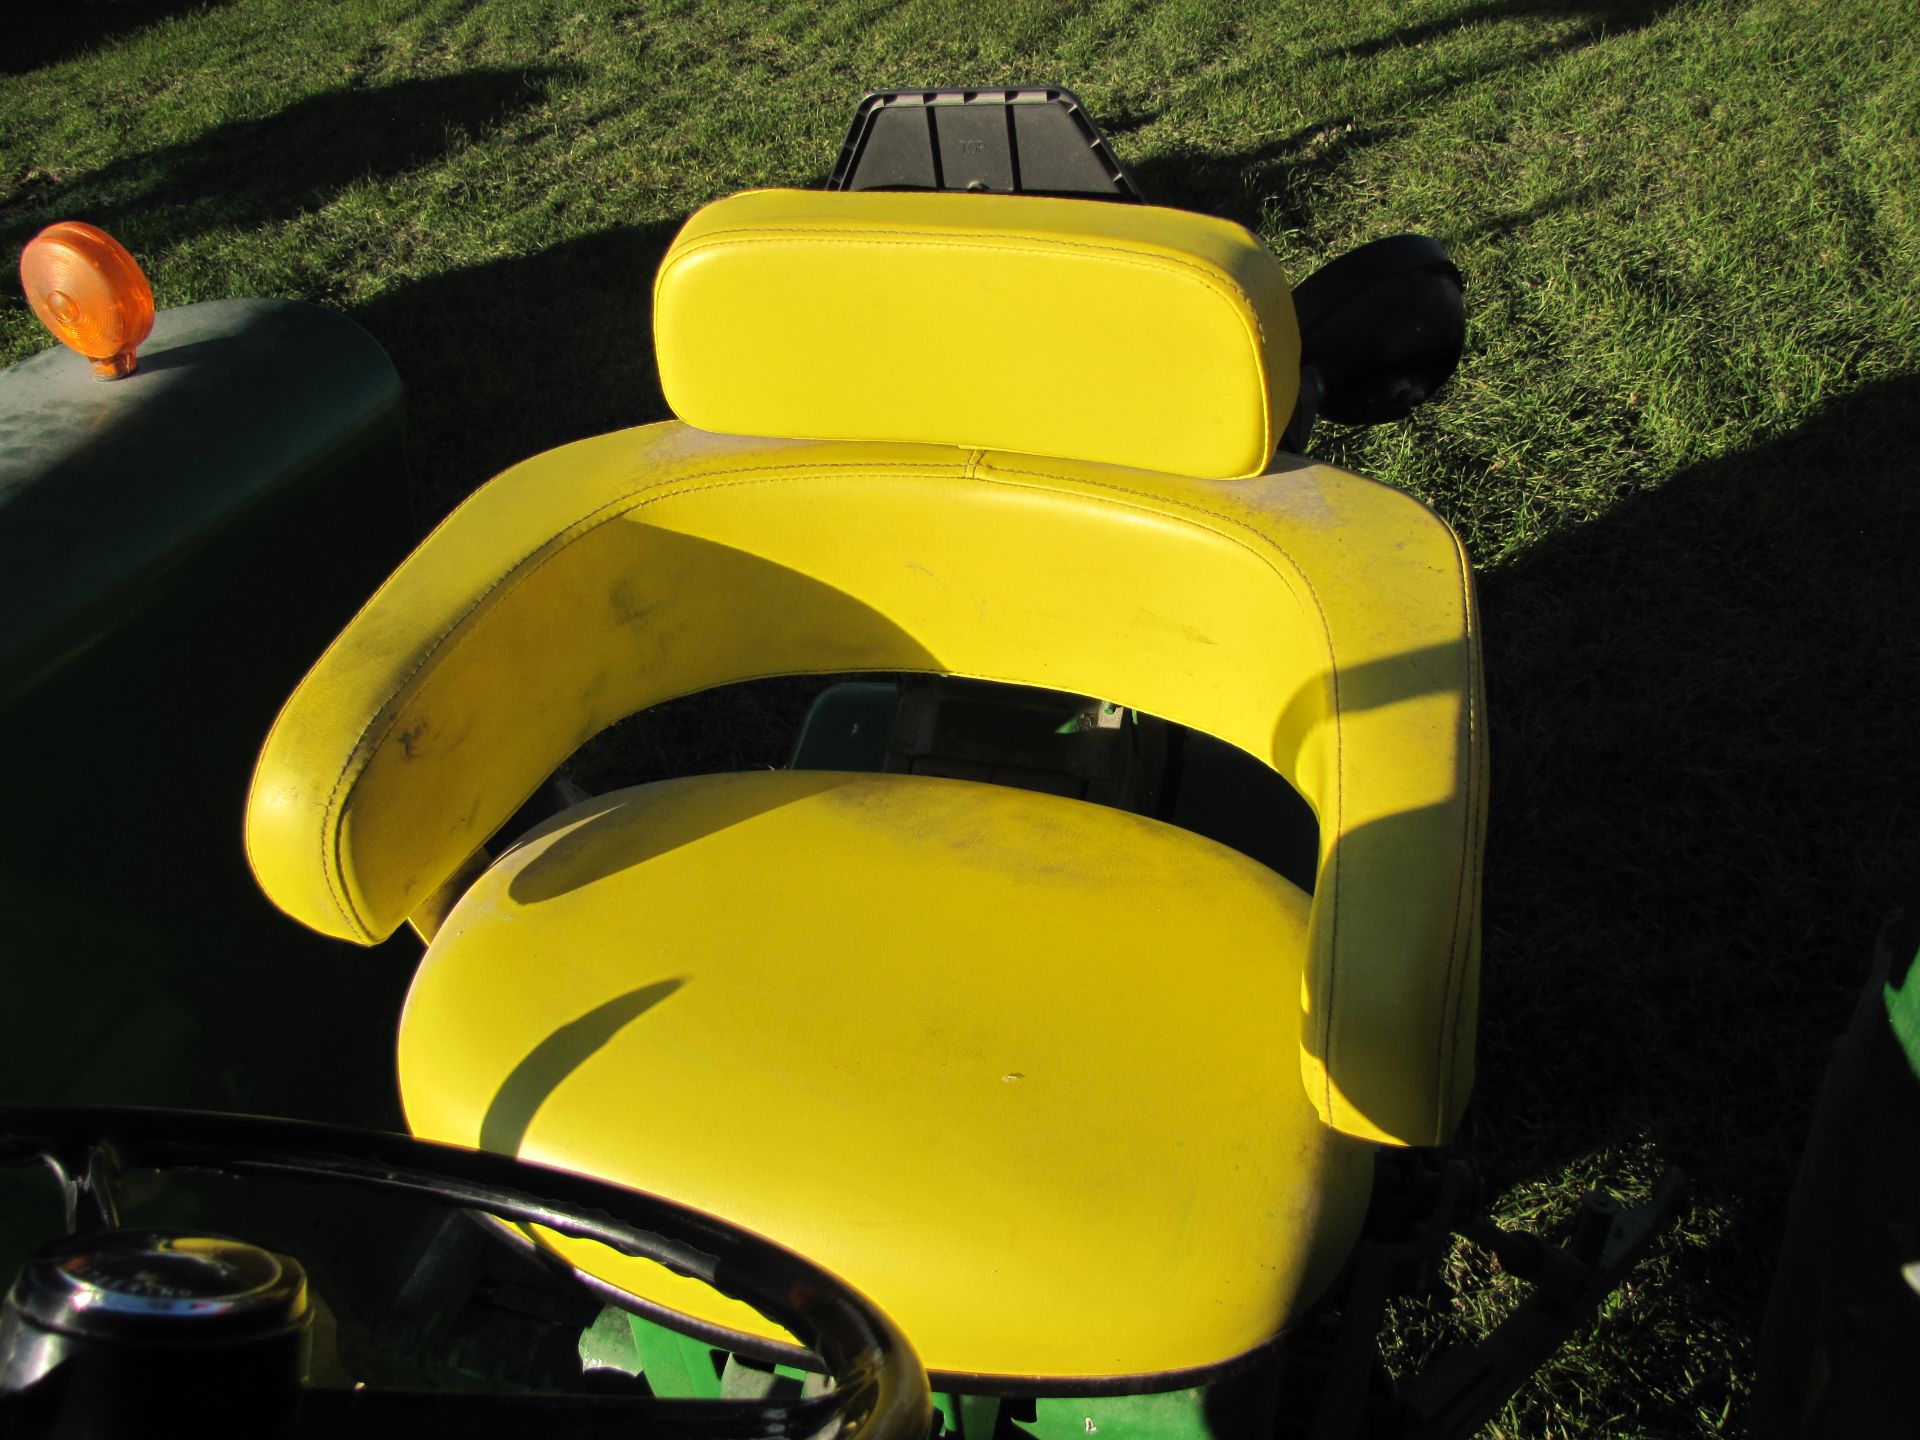 John Deere 3020 tractor, diesel, narrow front, 16.9-34 tires, 3 pt, 2 hyd remotes, 540 pto - Image 25 of 29